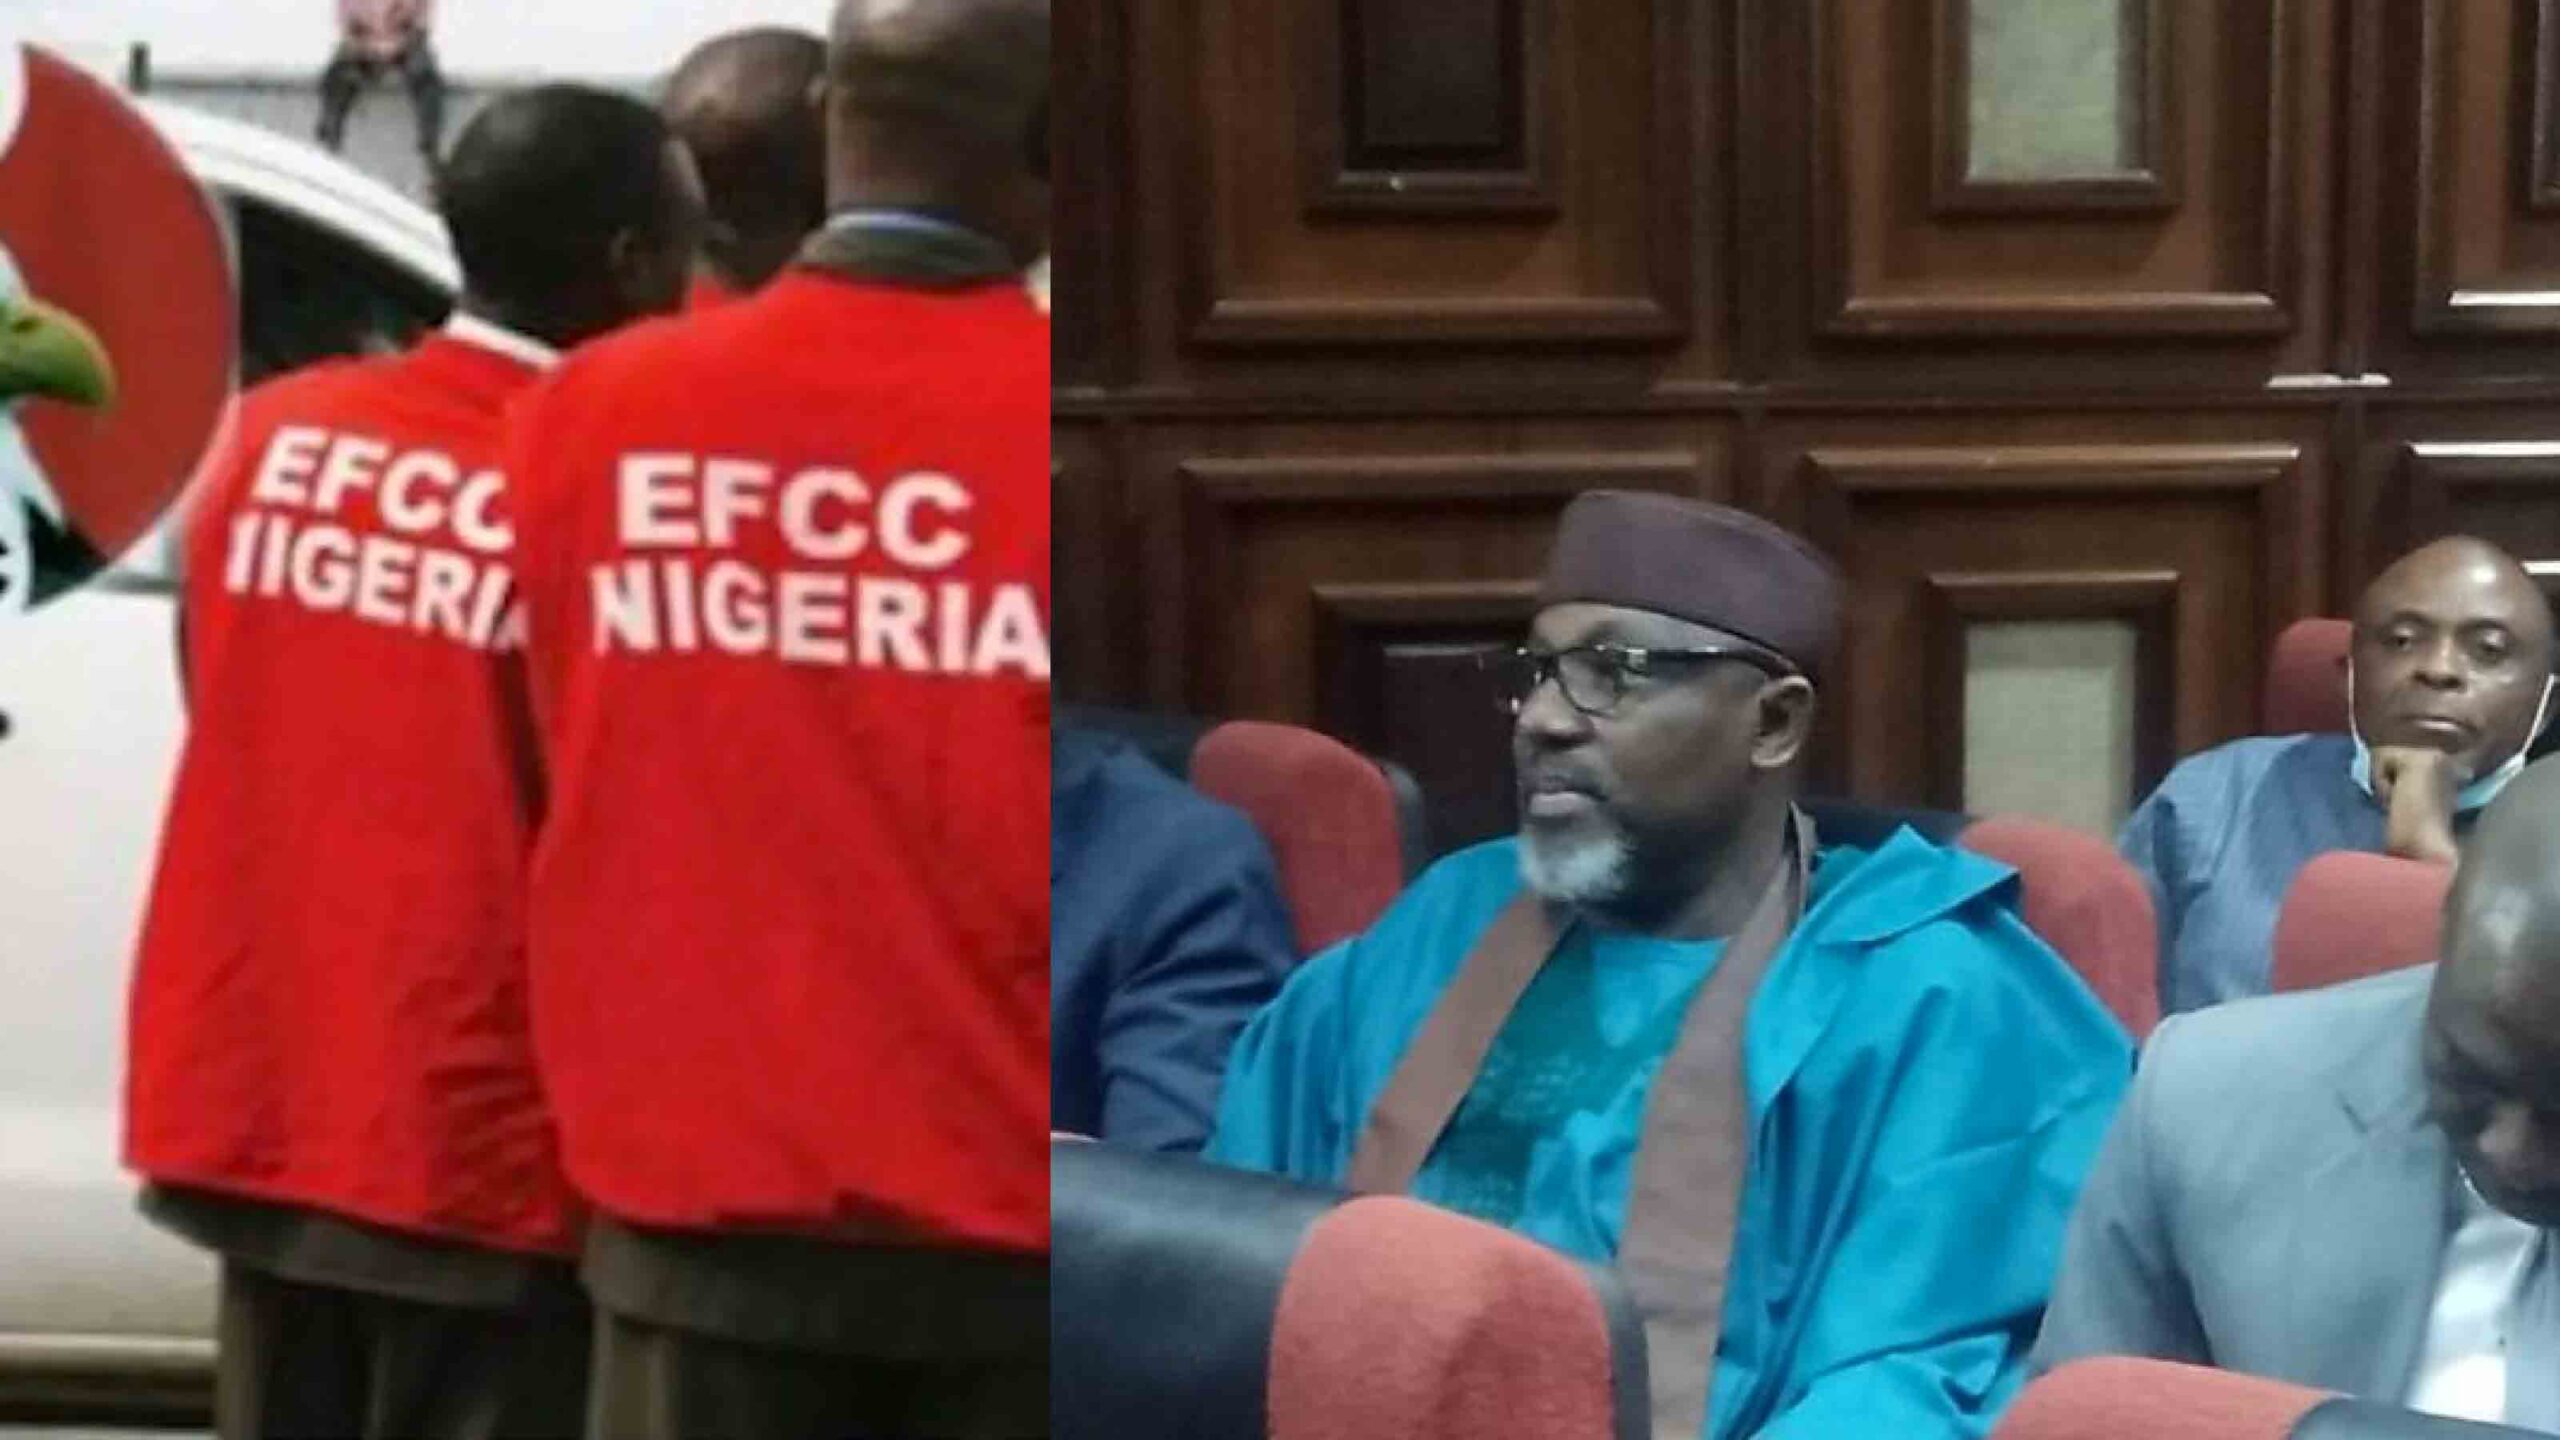 EFCC delivers Rochas Okorocha in court to face N2.9B corruption charges